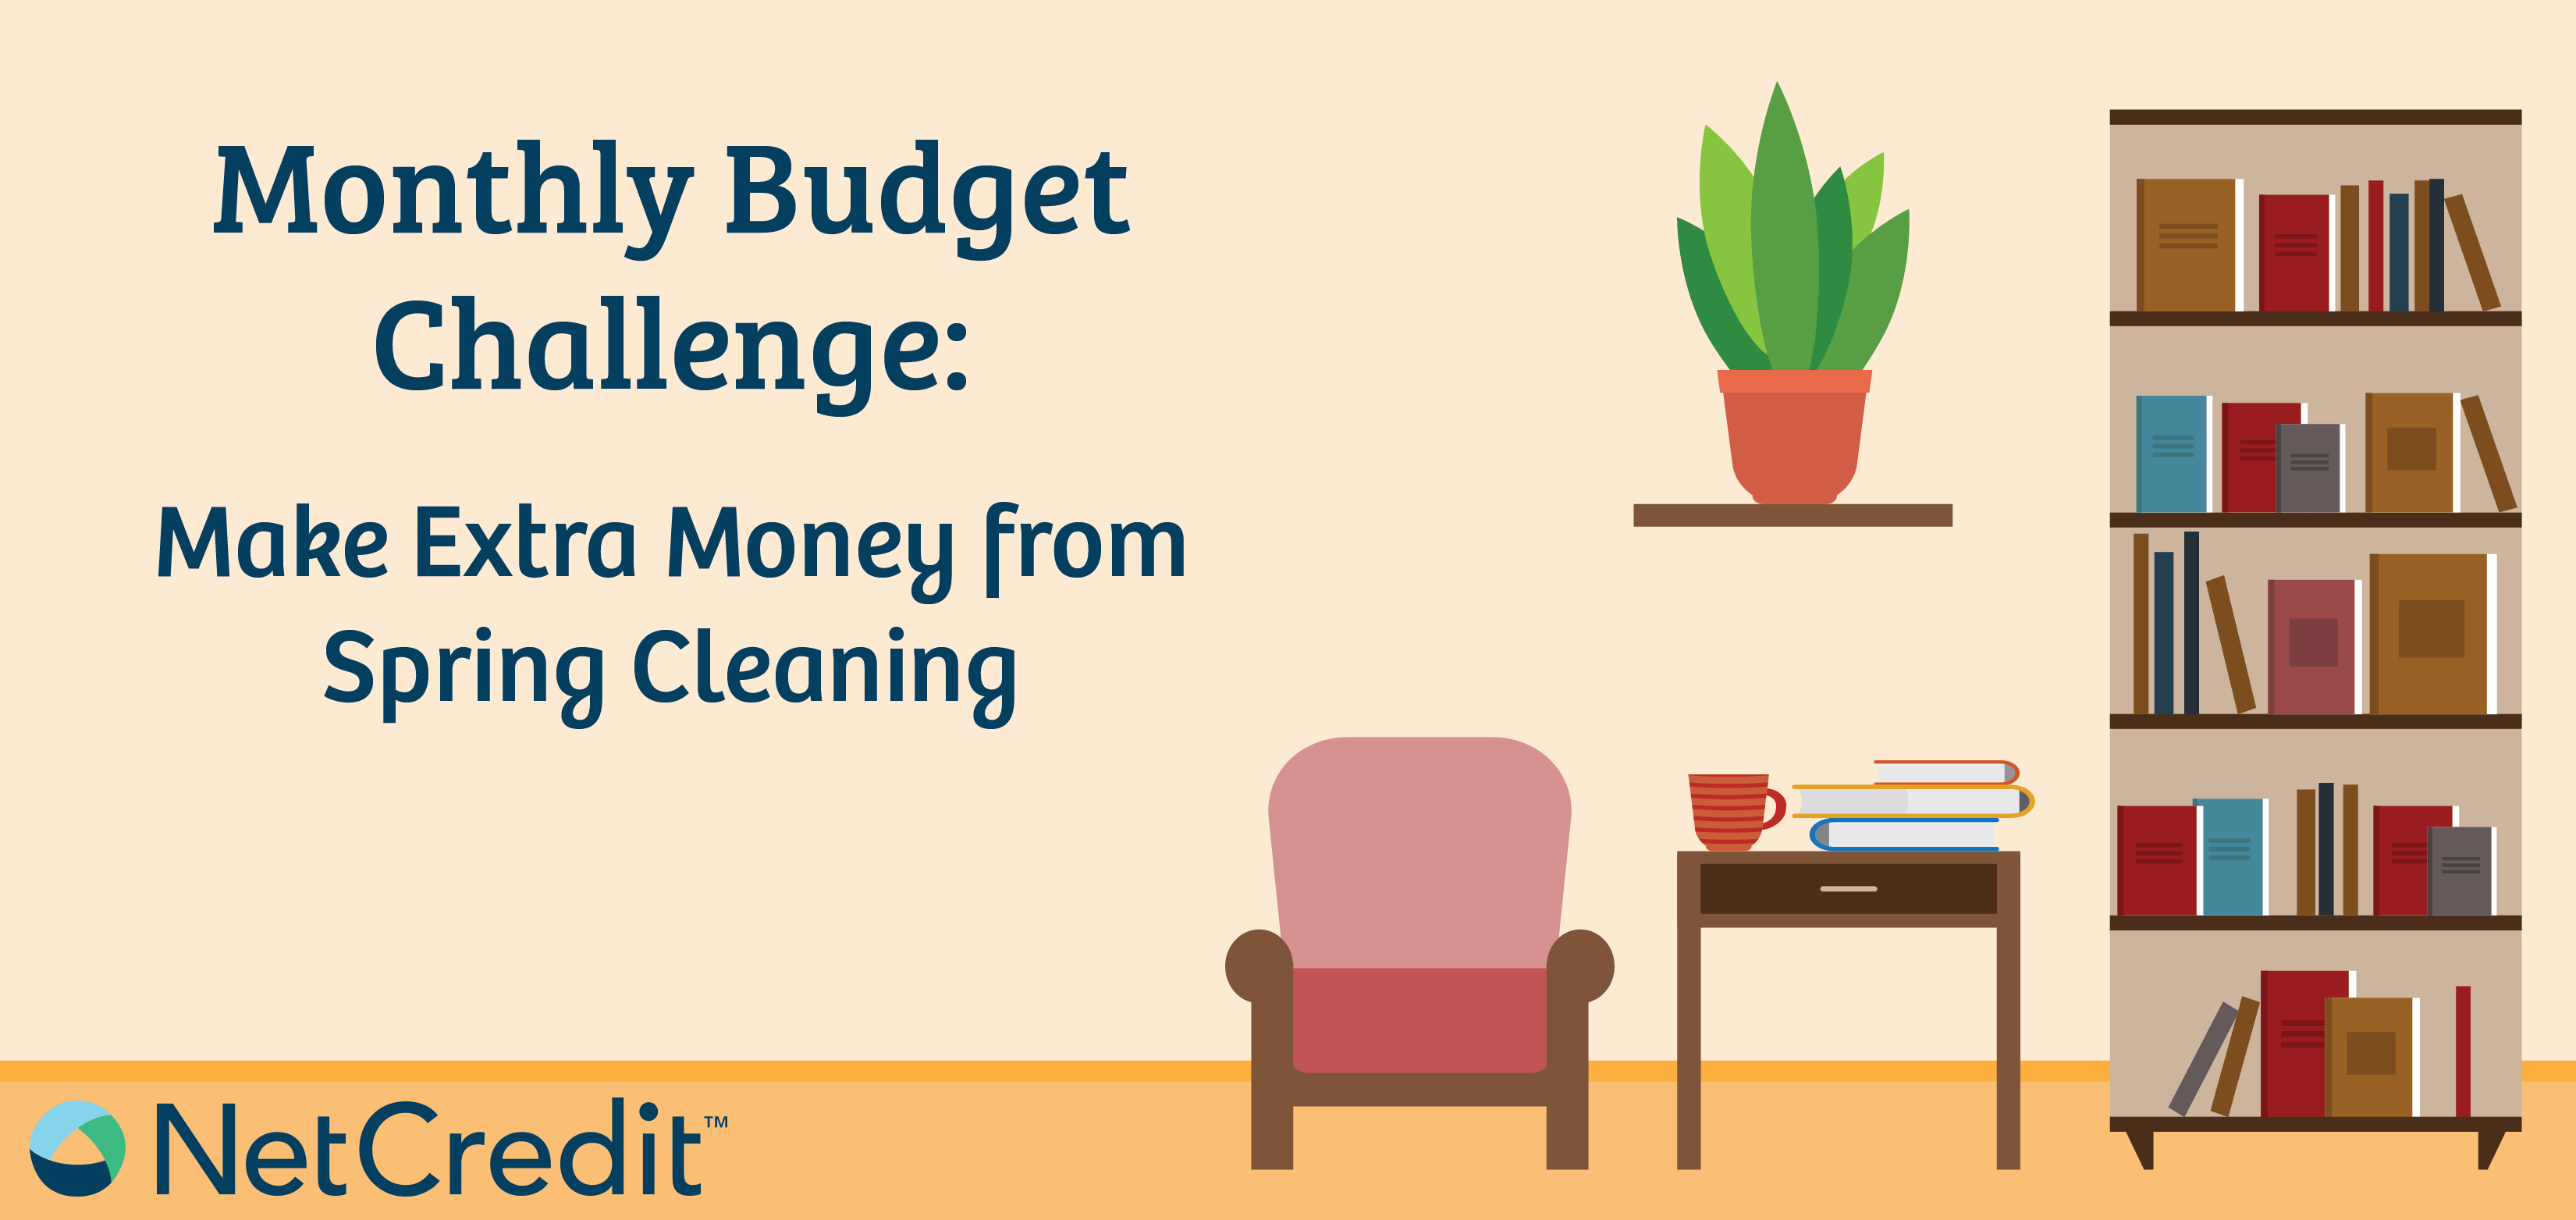 Monthly Budget Challenge: Make Extra Money from Spring Cleaning